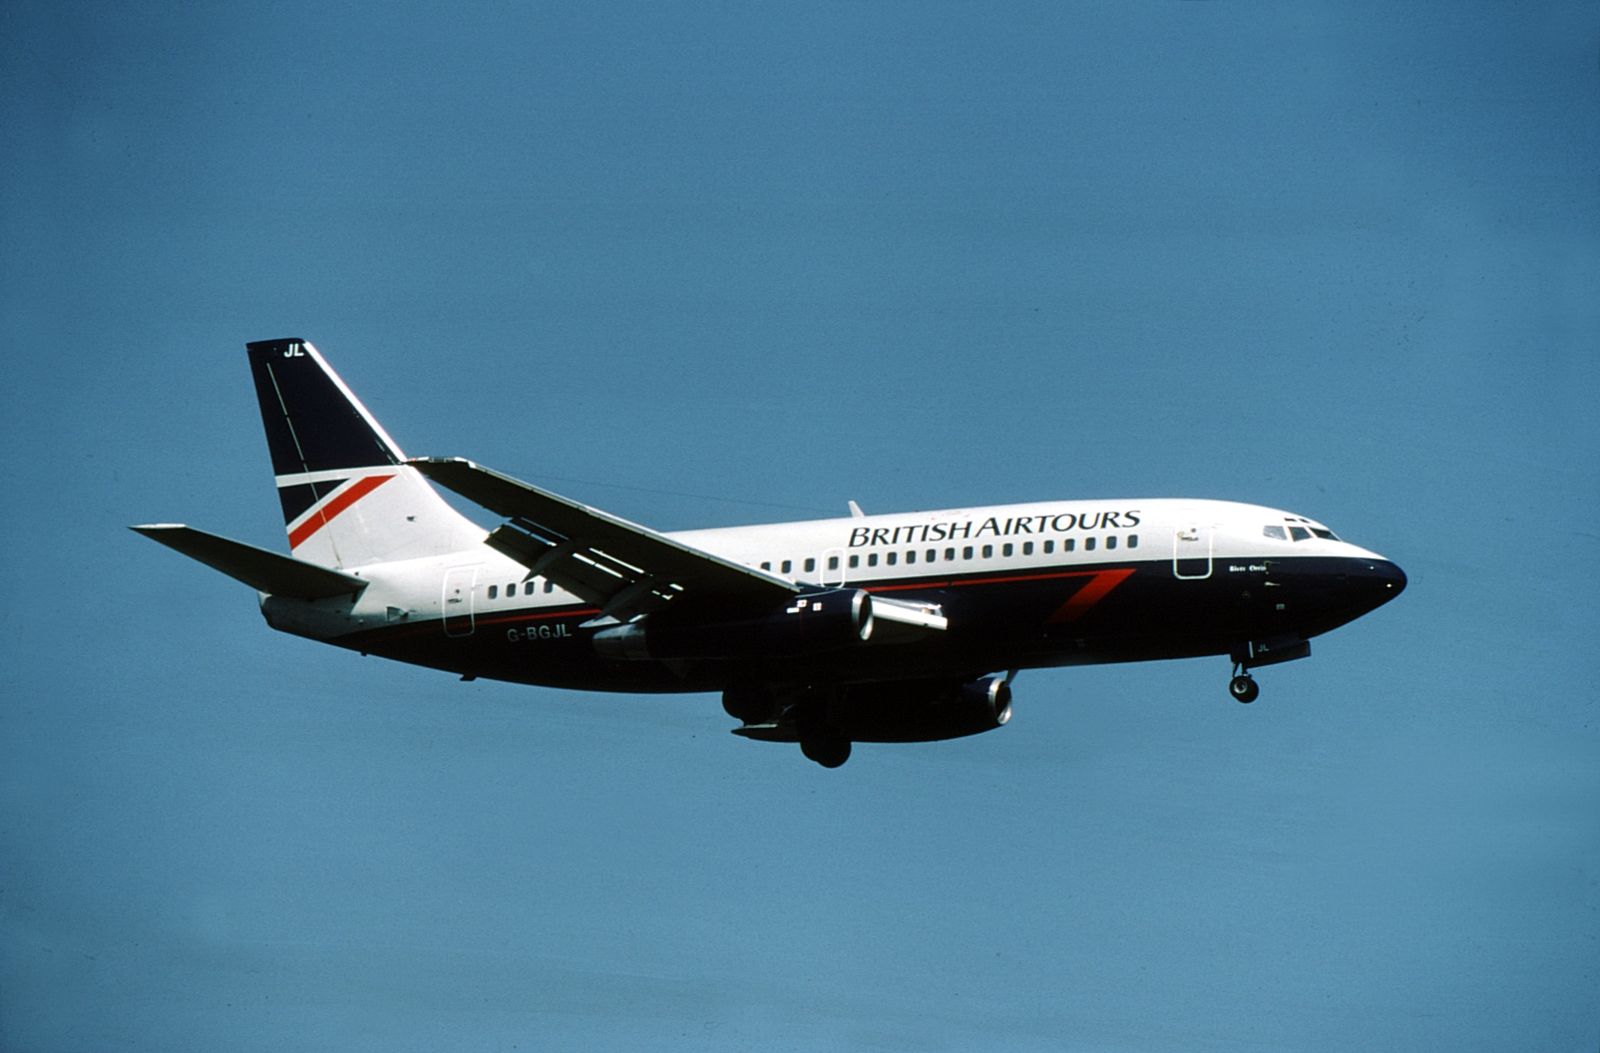 A British Airtours Boeing 737 flying in the sky.